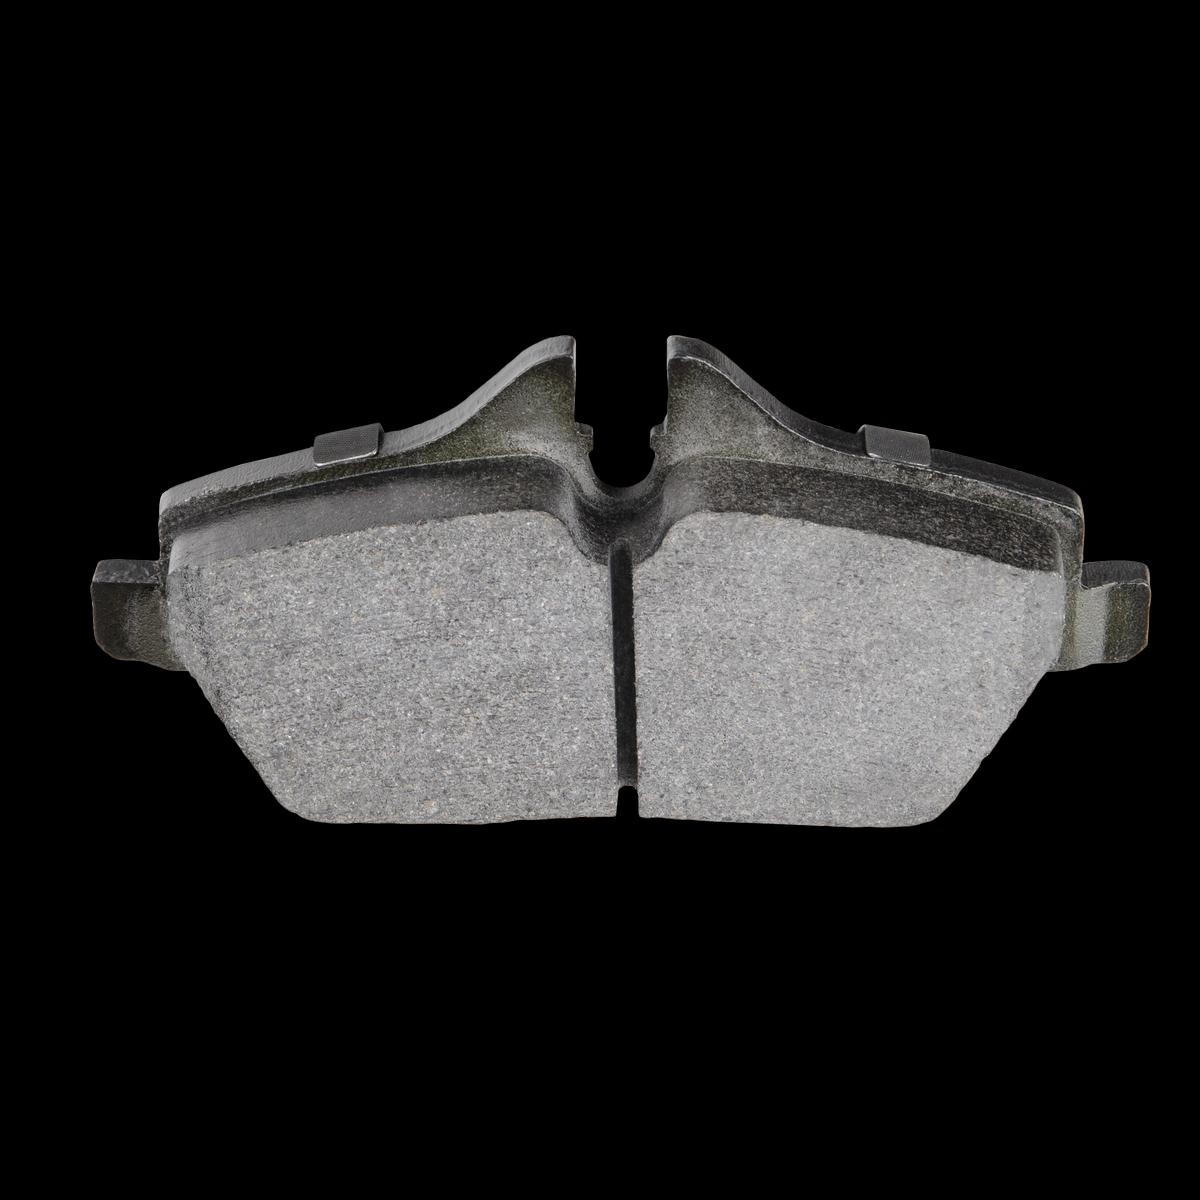 SKBP-0010138 Set of brake pads SKBP-0010138 STARK Front Axle, Low-Metallic, prepared for wear indicator, with bolts/screws, Photo corresponds to scope of supply